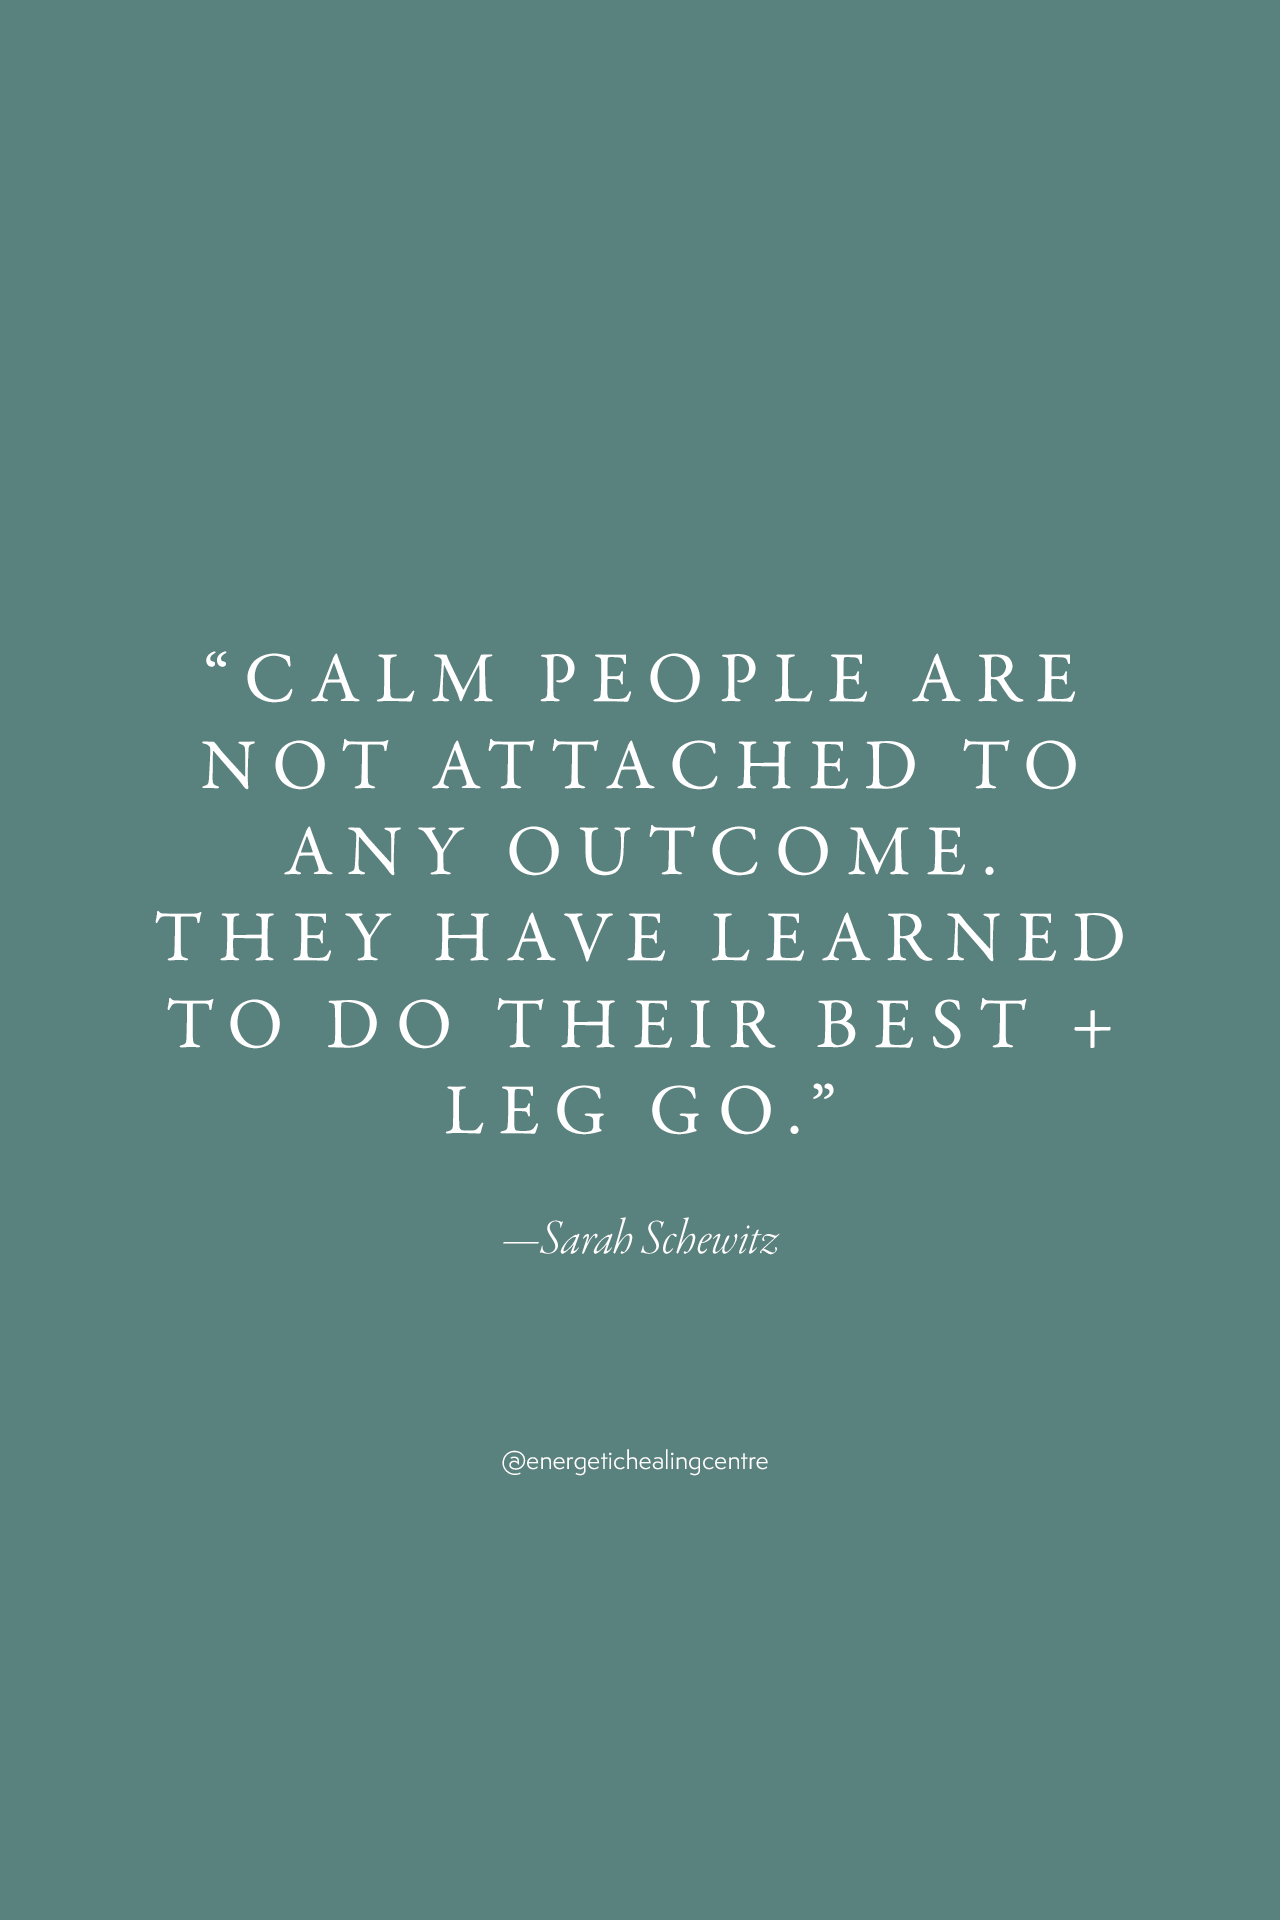 Quotes on letting go